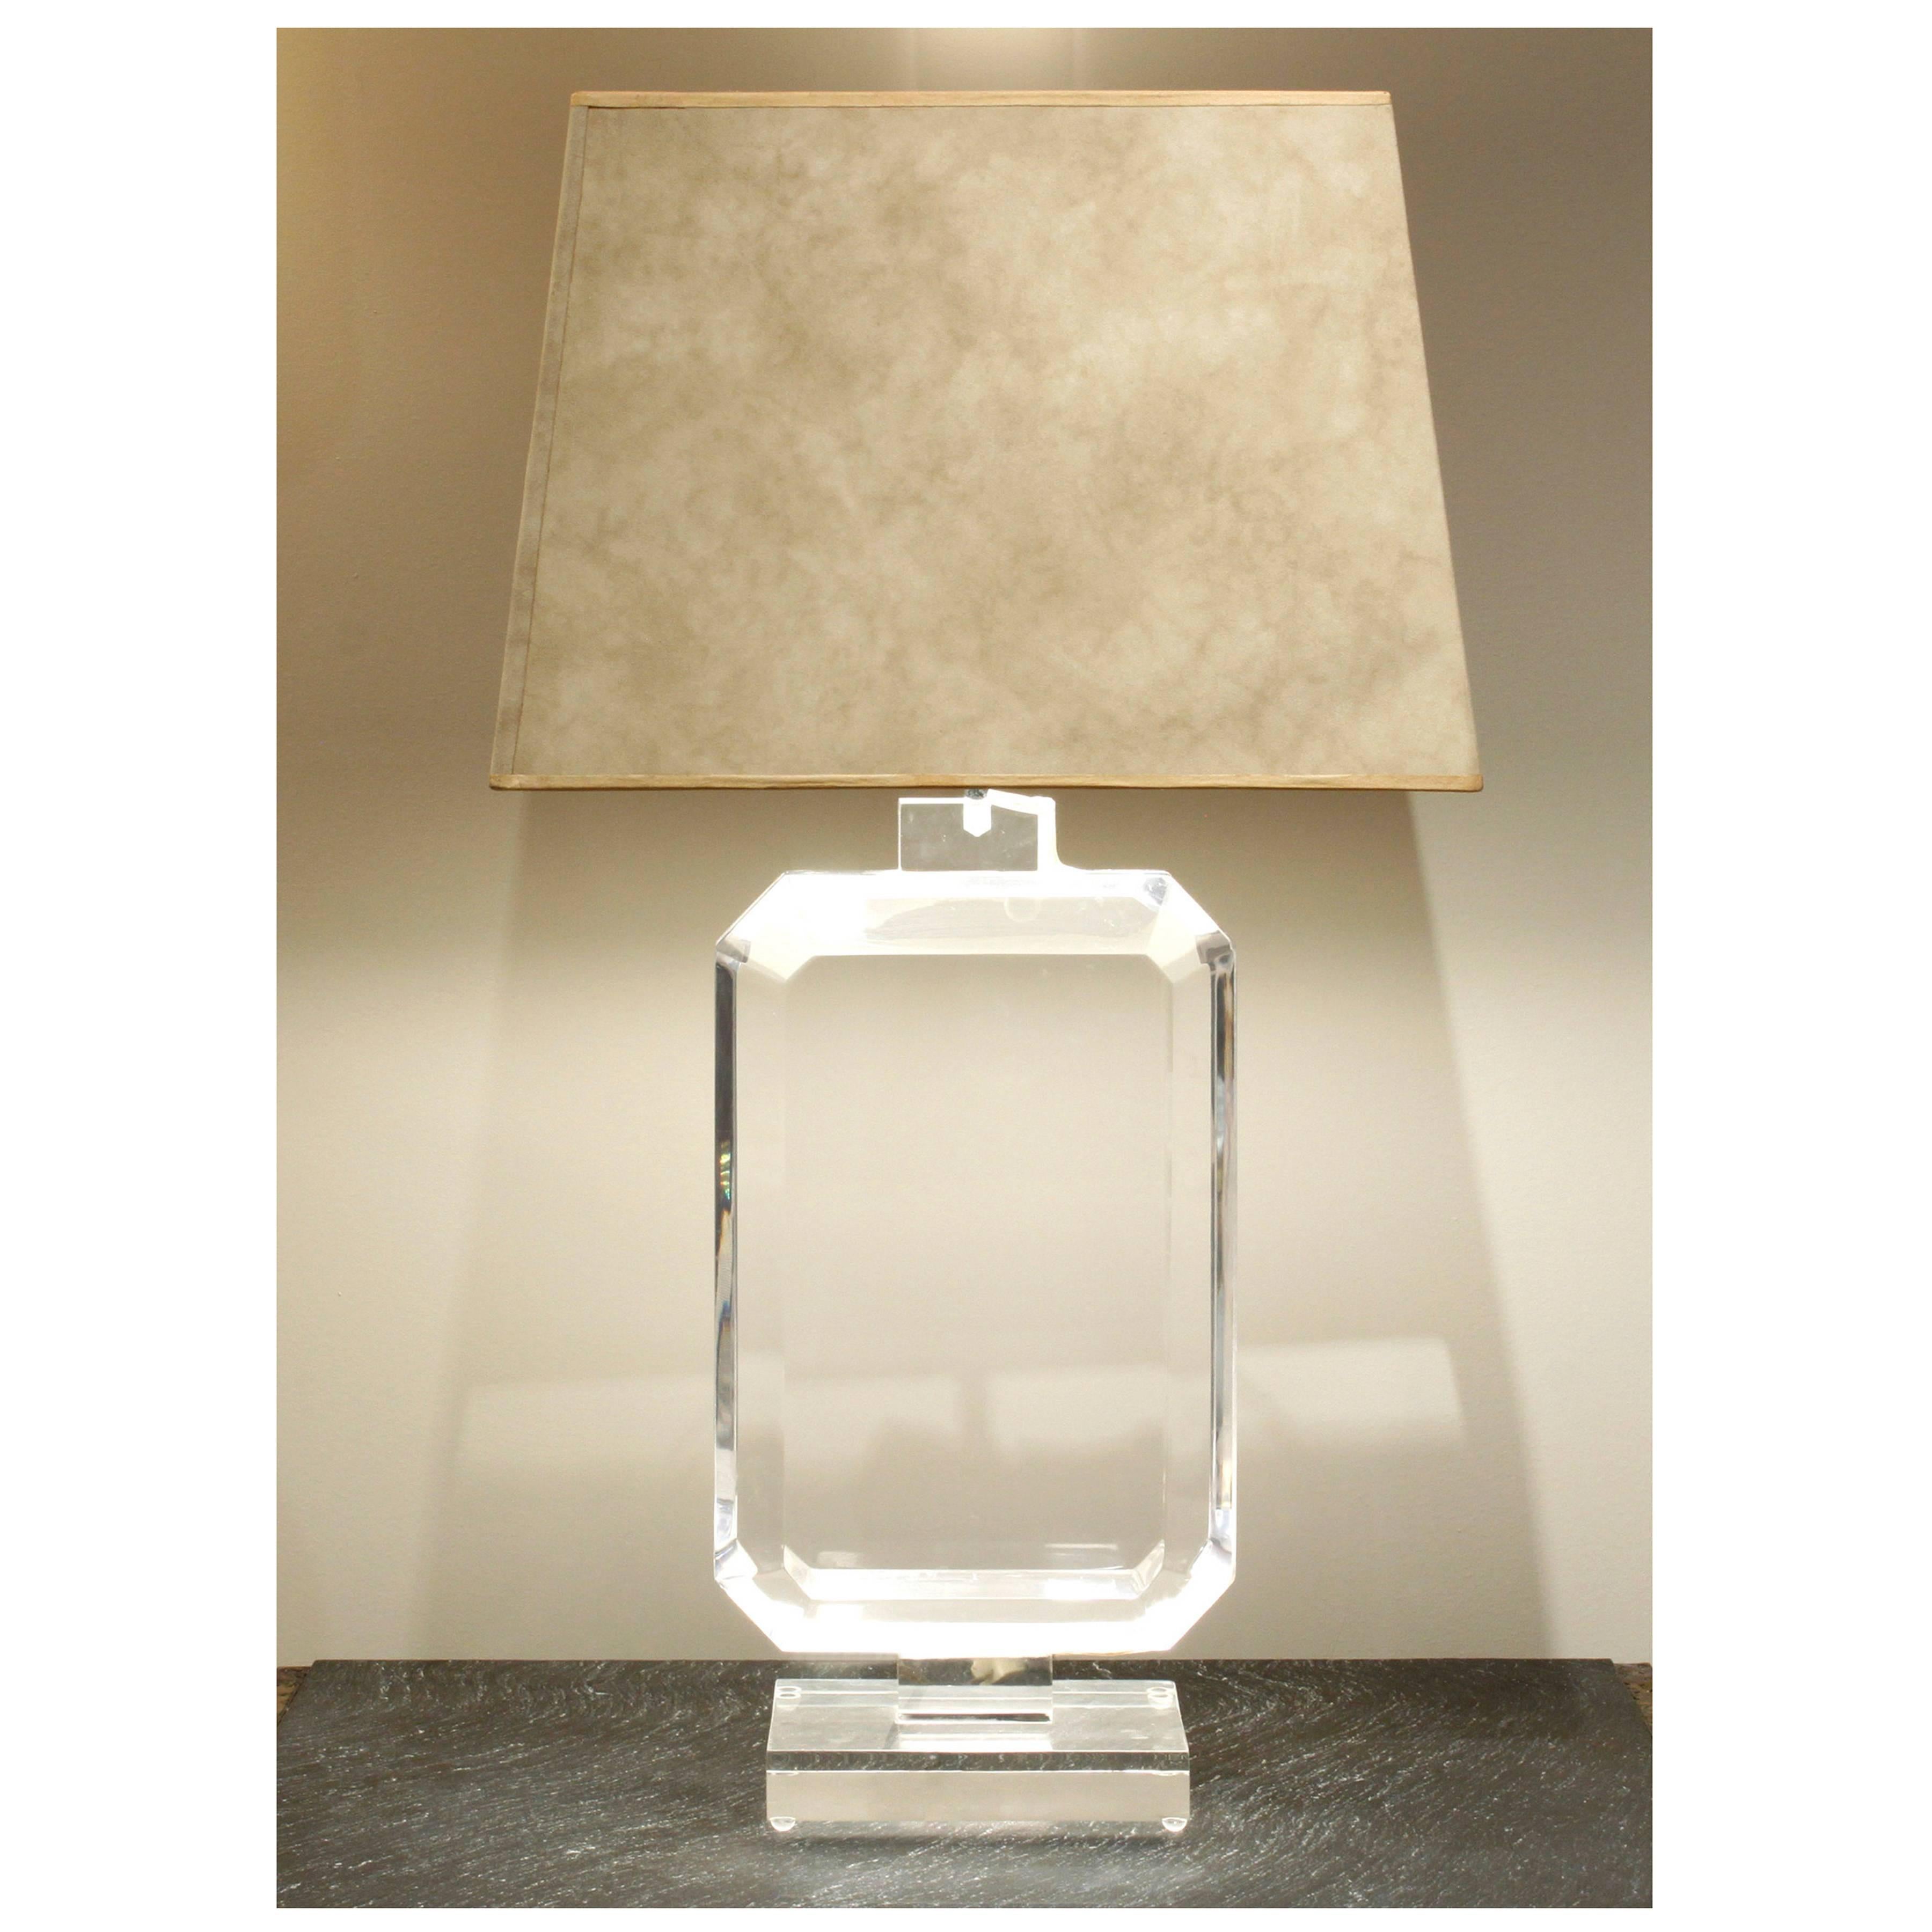 Large solid thick Lucite table lamp with ultrasuede shade by Les Prismatiques, American, 1970s.